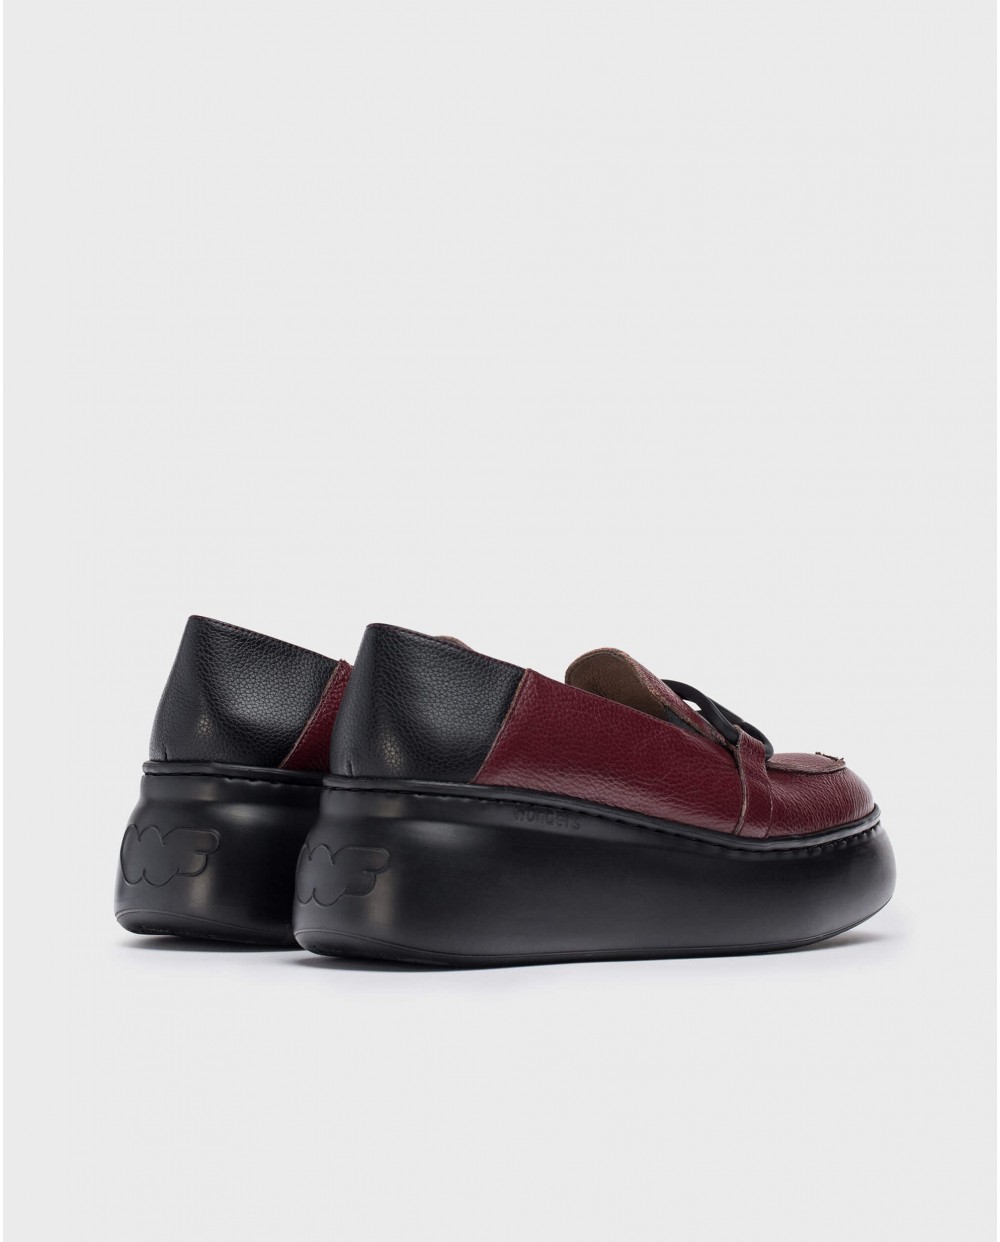 Wonders-Loafers-Burgundy Nora loafers